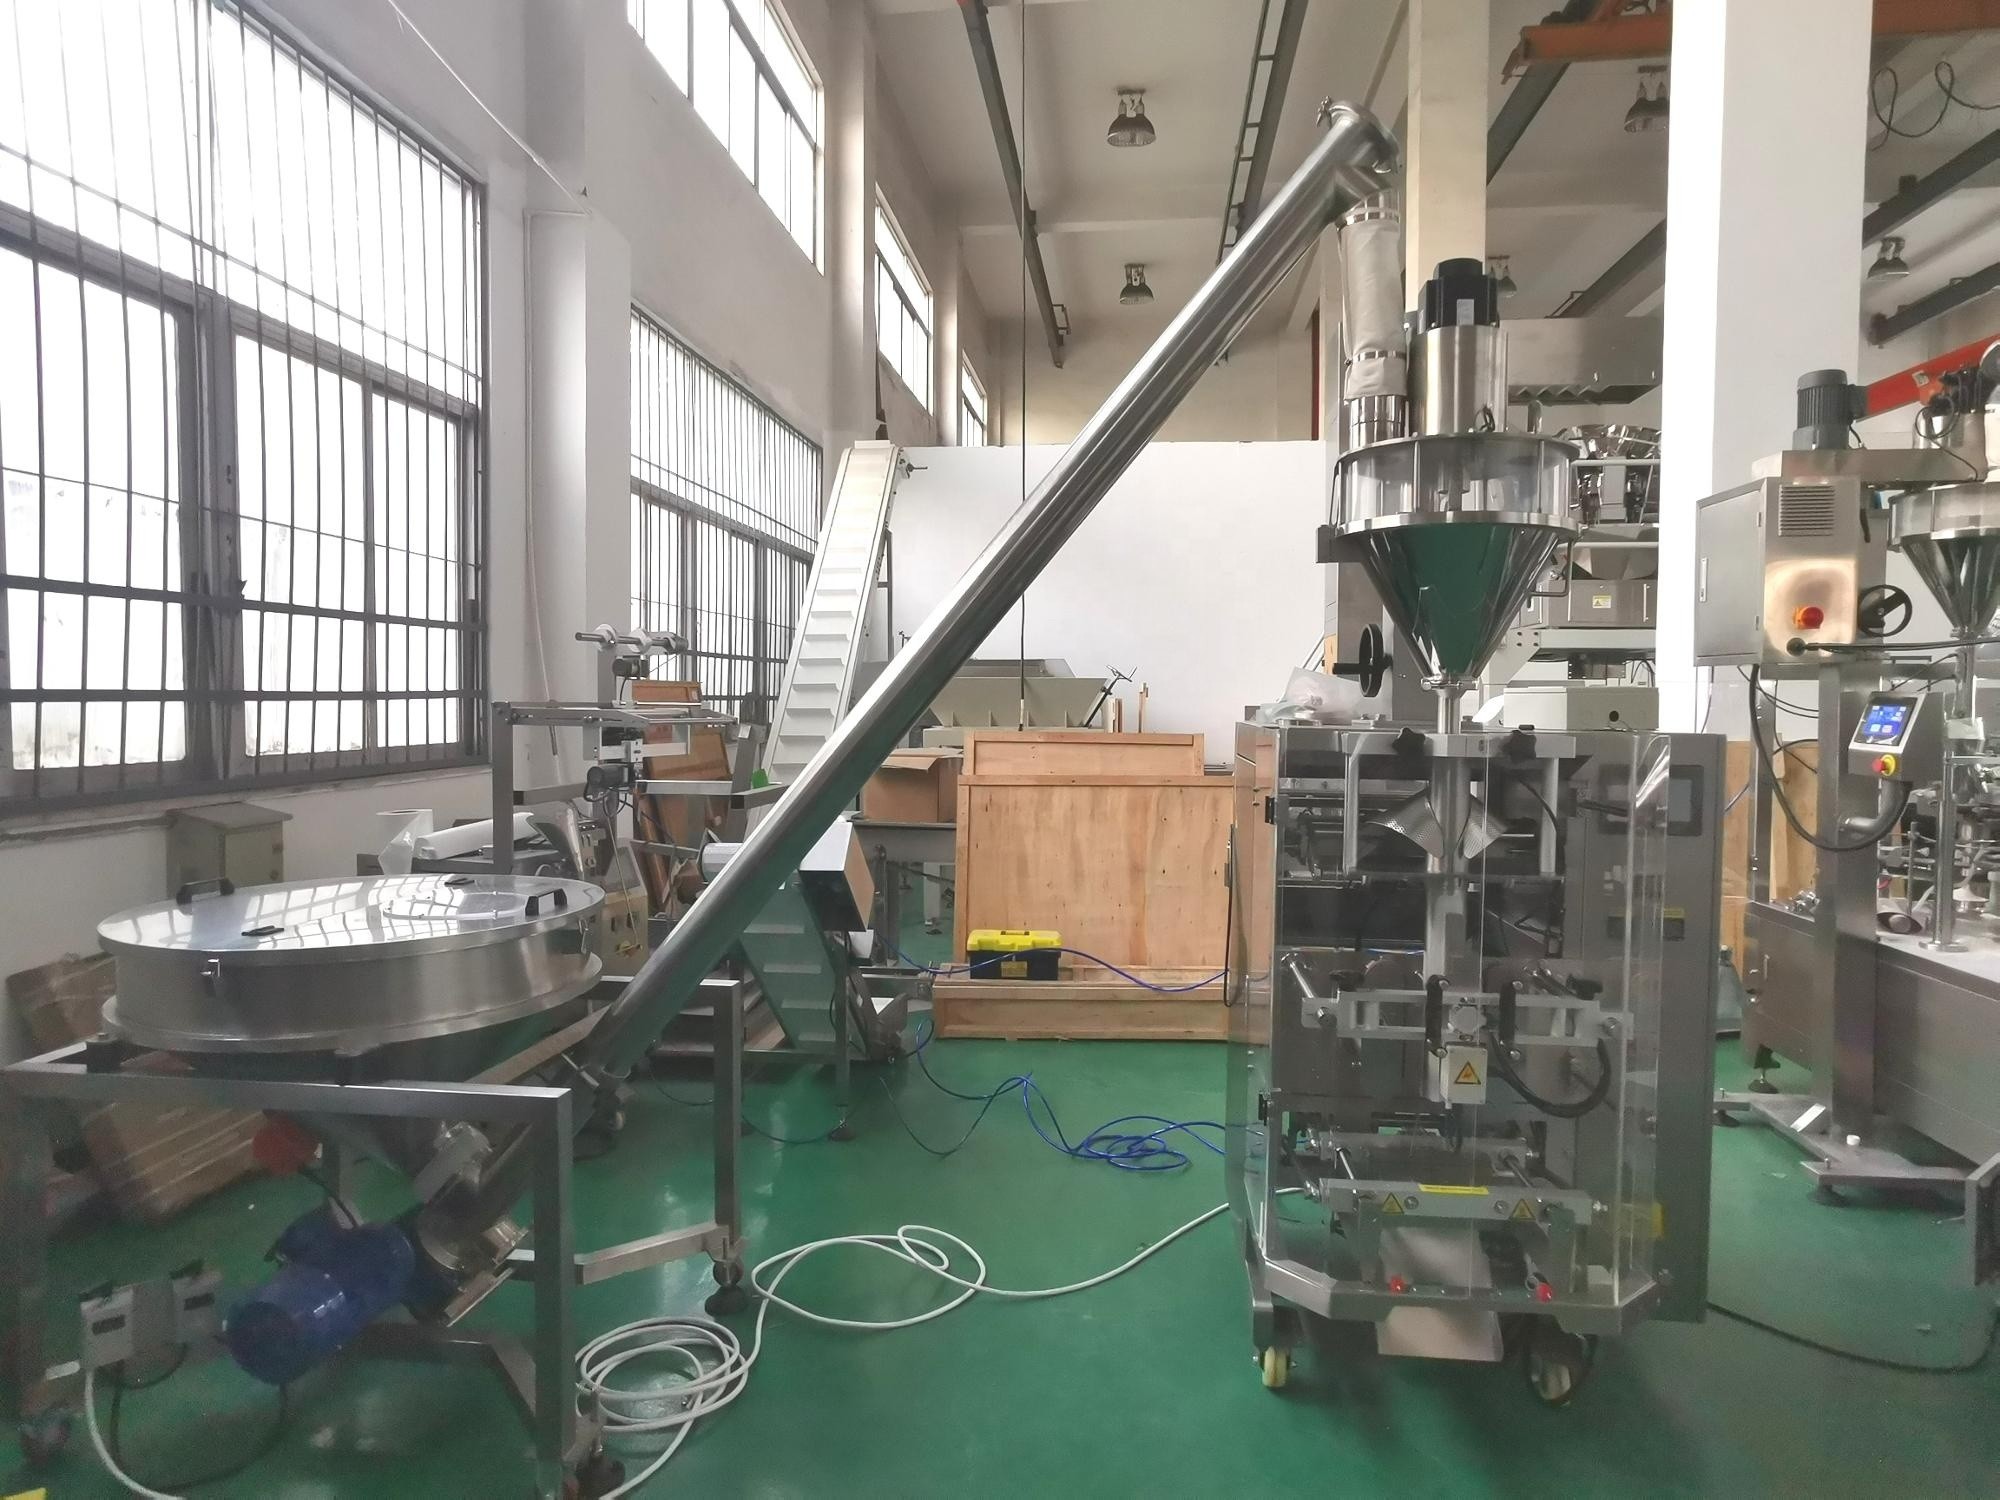 4.8Ton/Day Automatic Powder Packing Machine With Auger Filler